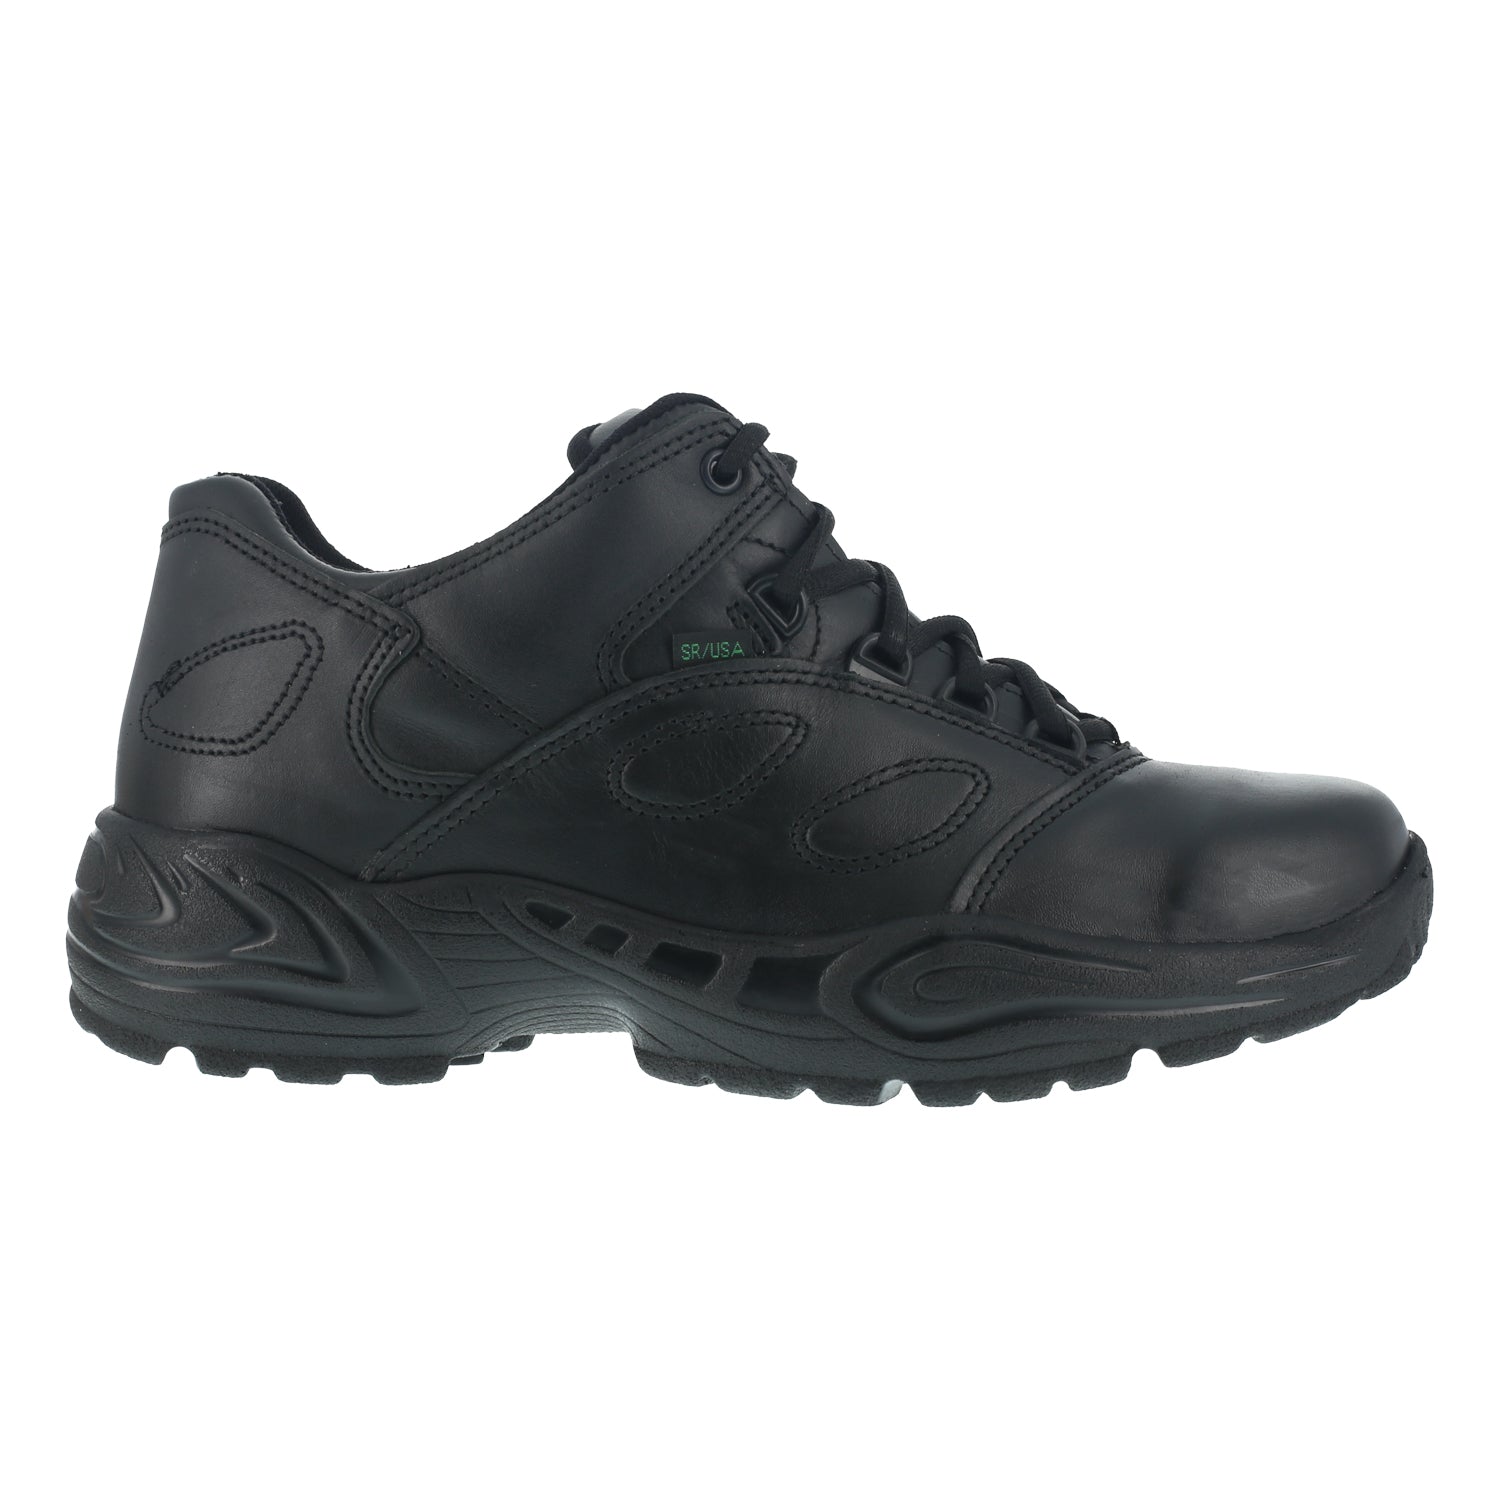 Reebok Womens Black Leather Work Shoes Postal Express Athletic – Western Company